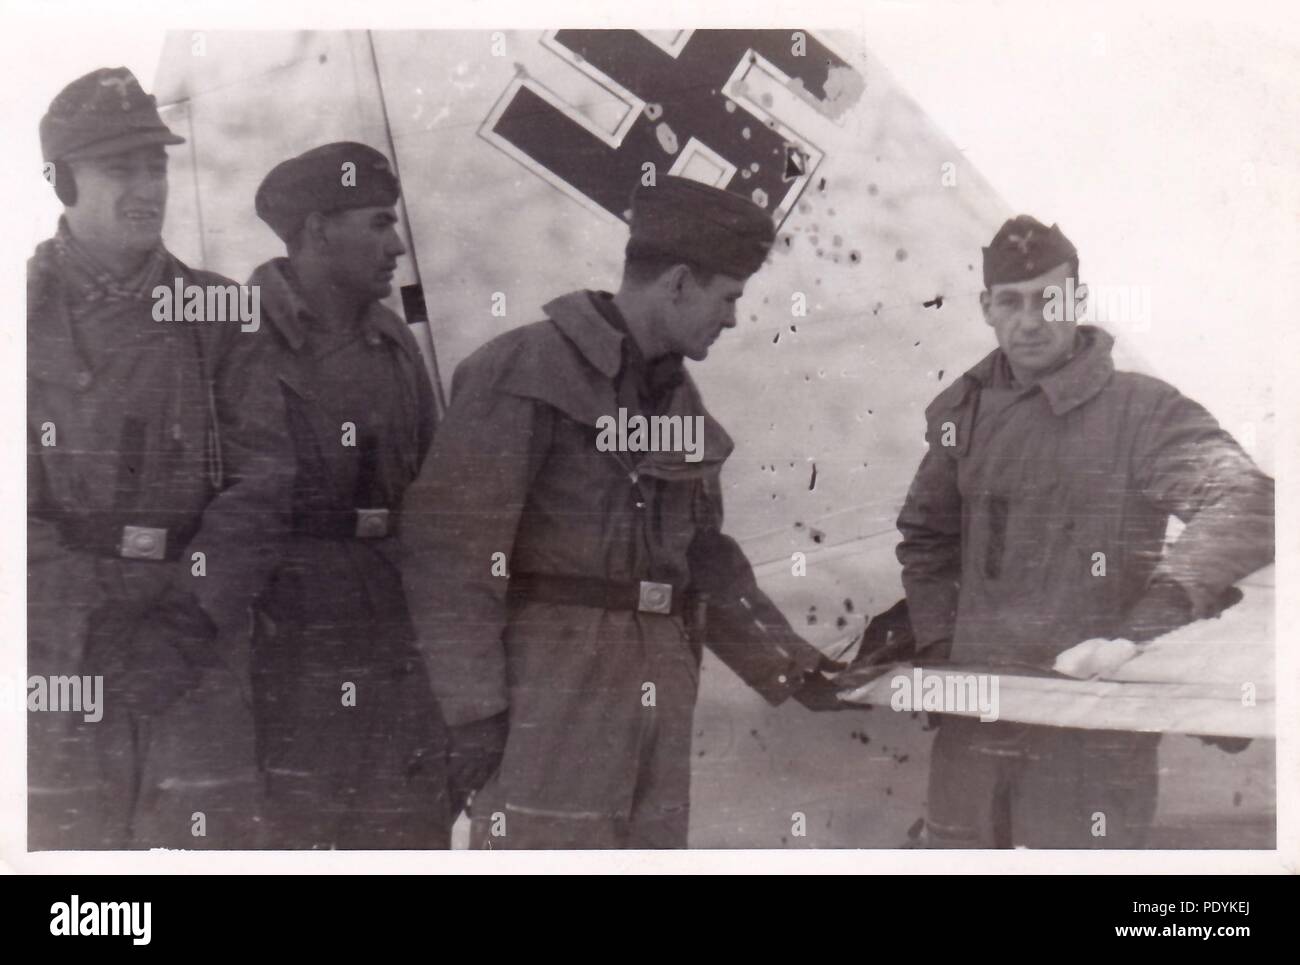 Image from the photo album of Feldwebel Willi Hoffmann of 5. Staffel, Kampfgeschwader 30: Willi Erkens and his crew from 5./KG 30 pose in front of their winter-camouflaged Junkers Ju 88 bomber, following a hit by Flak on the right stabiliser in the Winter of 1941-42. From left to right: Unteroffizier Otto Bienmüller (Radio Operator), Gefreiter Willi Hoffmann (Air Gunner), Feldwebel Willi Erkens (Pilot) and Feldwebel Richard Müller (Observer - standing in the hole caused by a shell). The entire crew failed to return from a mission in the Mediterranean on 23rd January 1943. Stock Photo